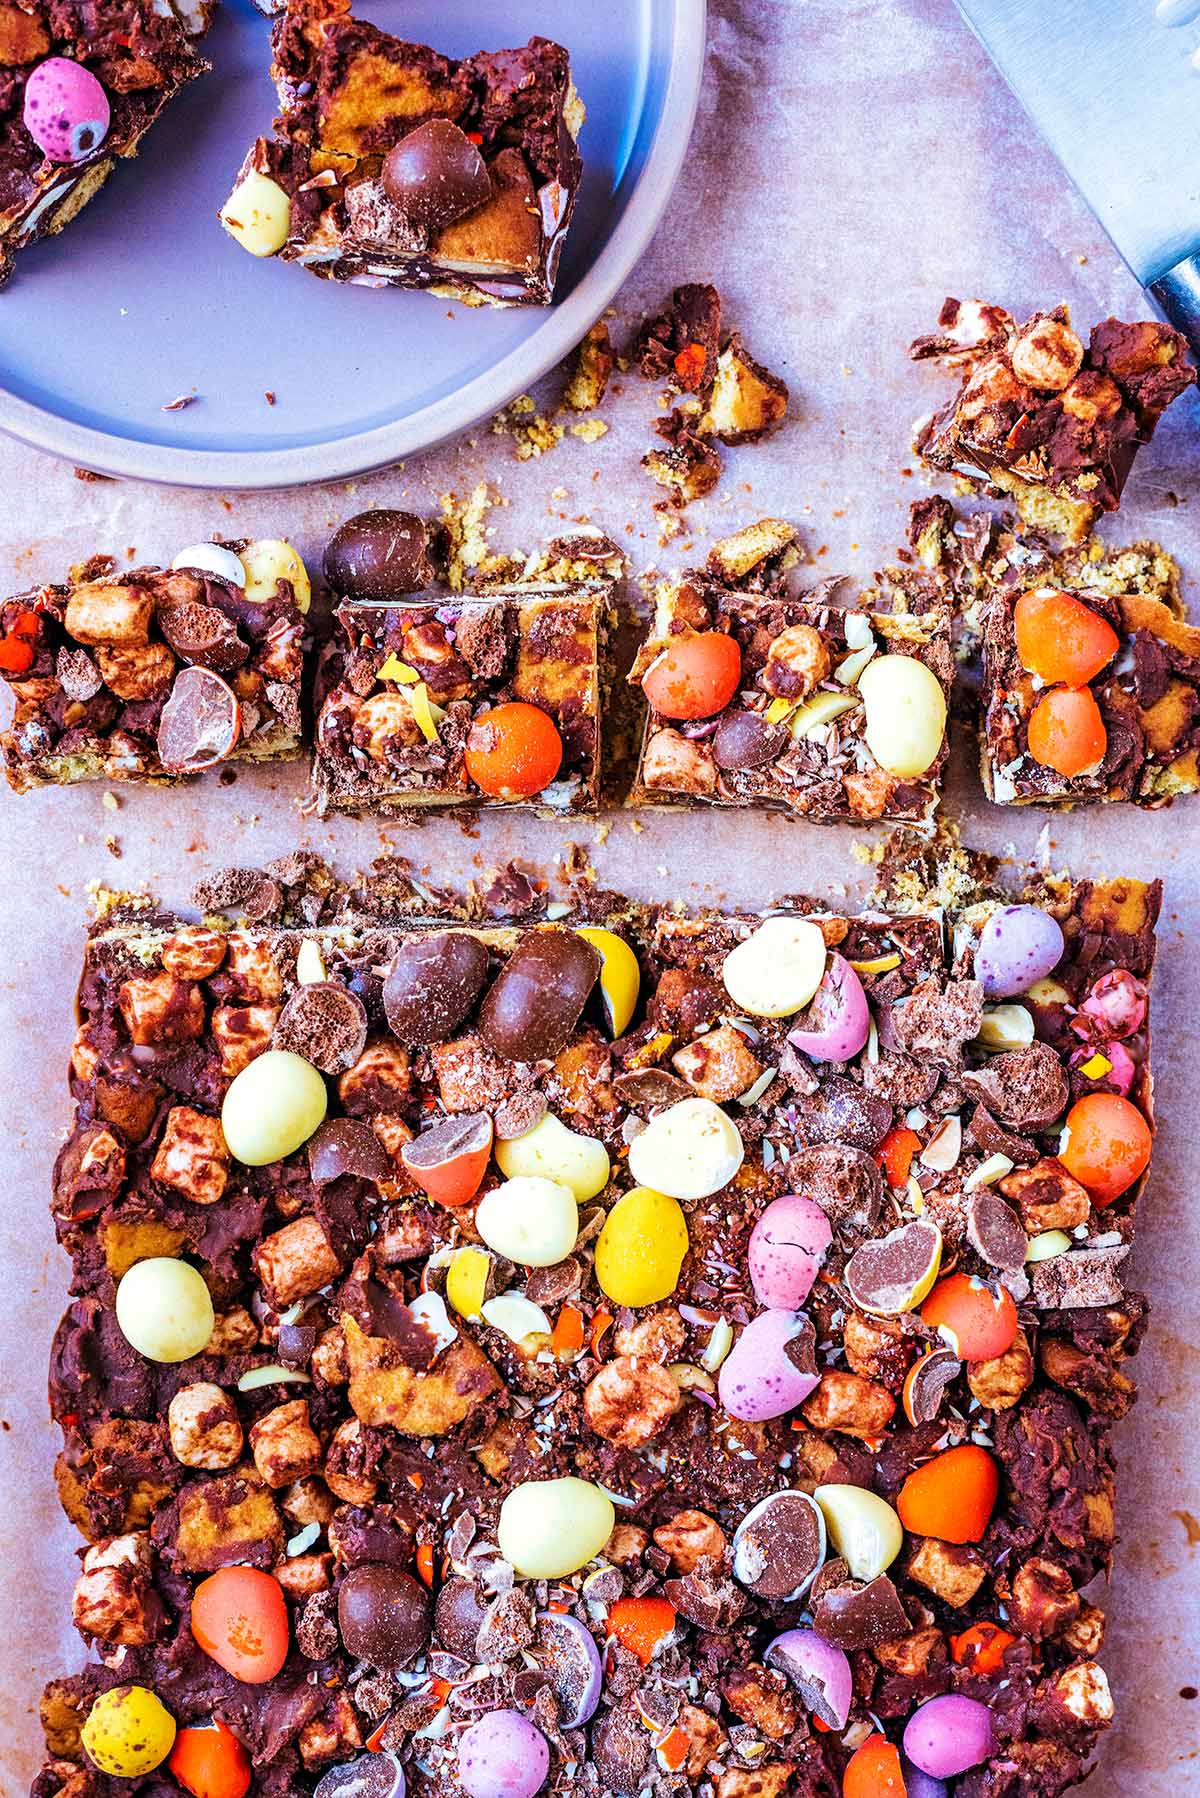 A large slab of rocky road with some cut off into squares.